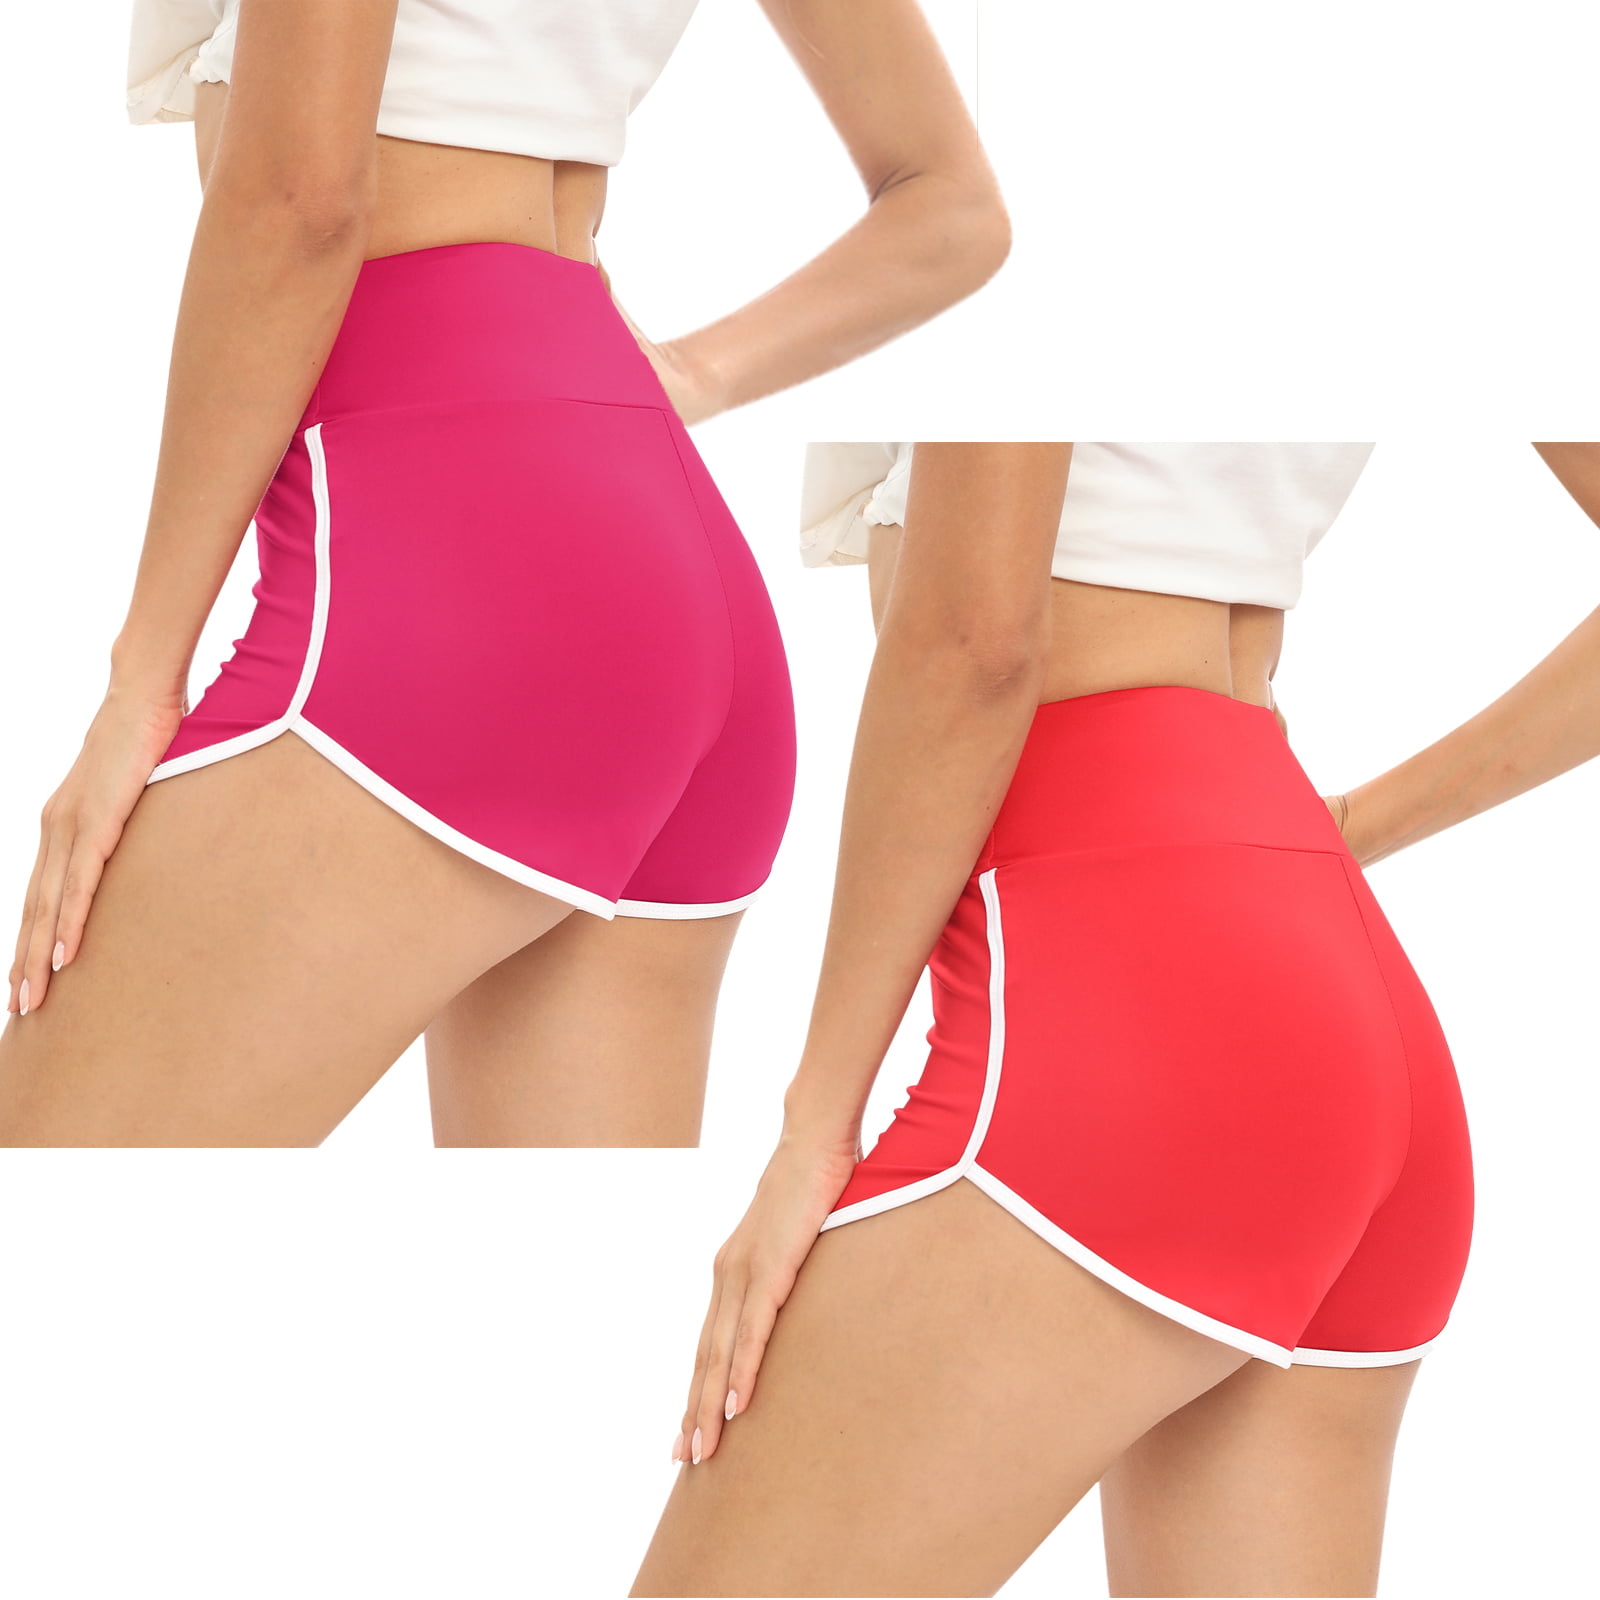 WBQ 2 Pack Yoga Sports Shorts for Women High Waisted Workout Booty Shorts  Plus Size Workout Gym Athletic Shorts Stretch Cheerleader Running Dance  Volleyball Shorts Summer Sleeping Shorts, S-4XL 